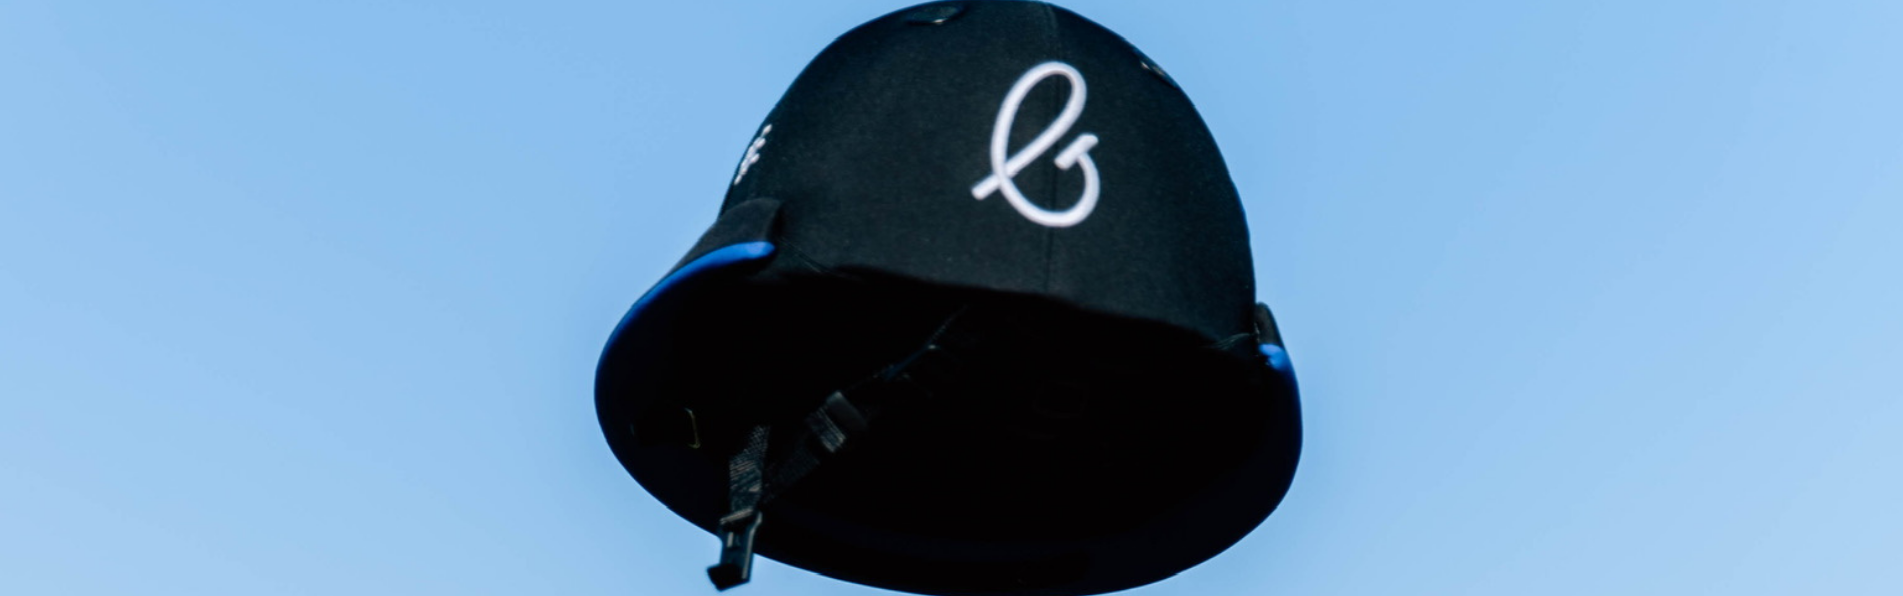 https://www.kronopolo.com/image/cache/catalog/blog/banner%203/Krono-polo-helmets-certified-1903x596.png